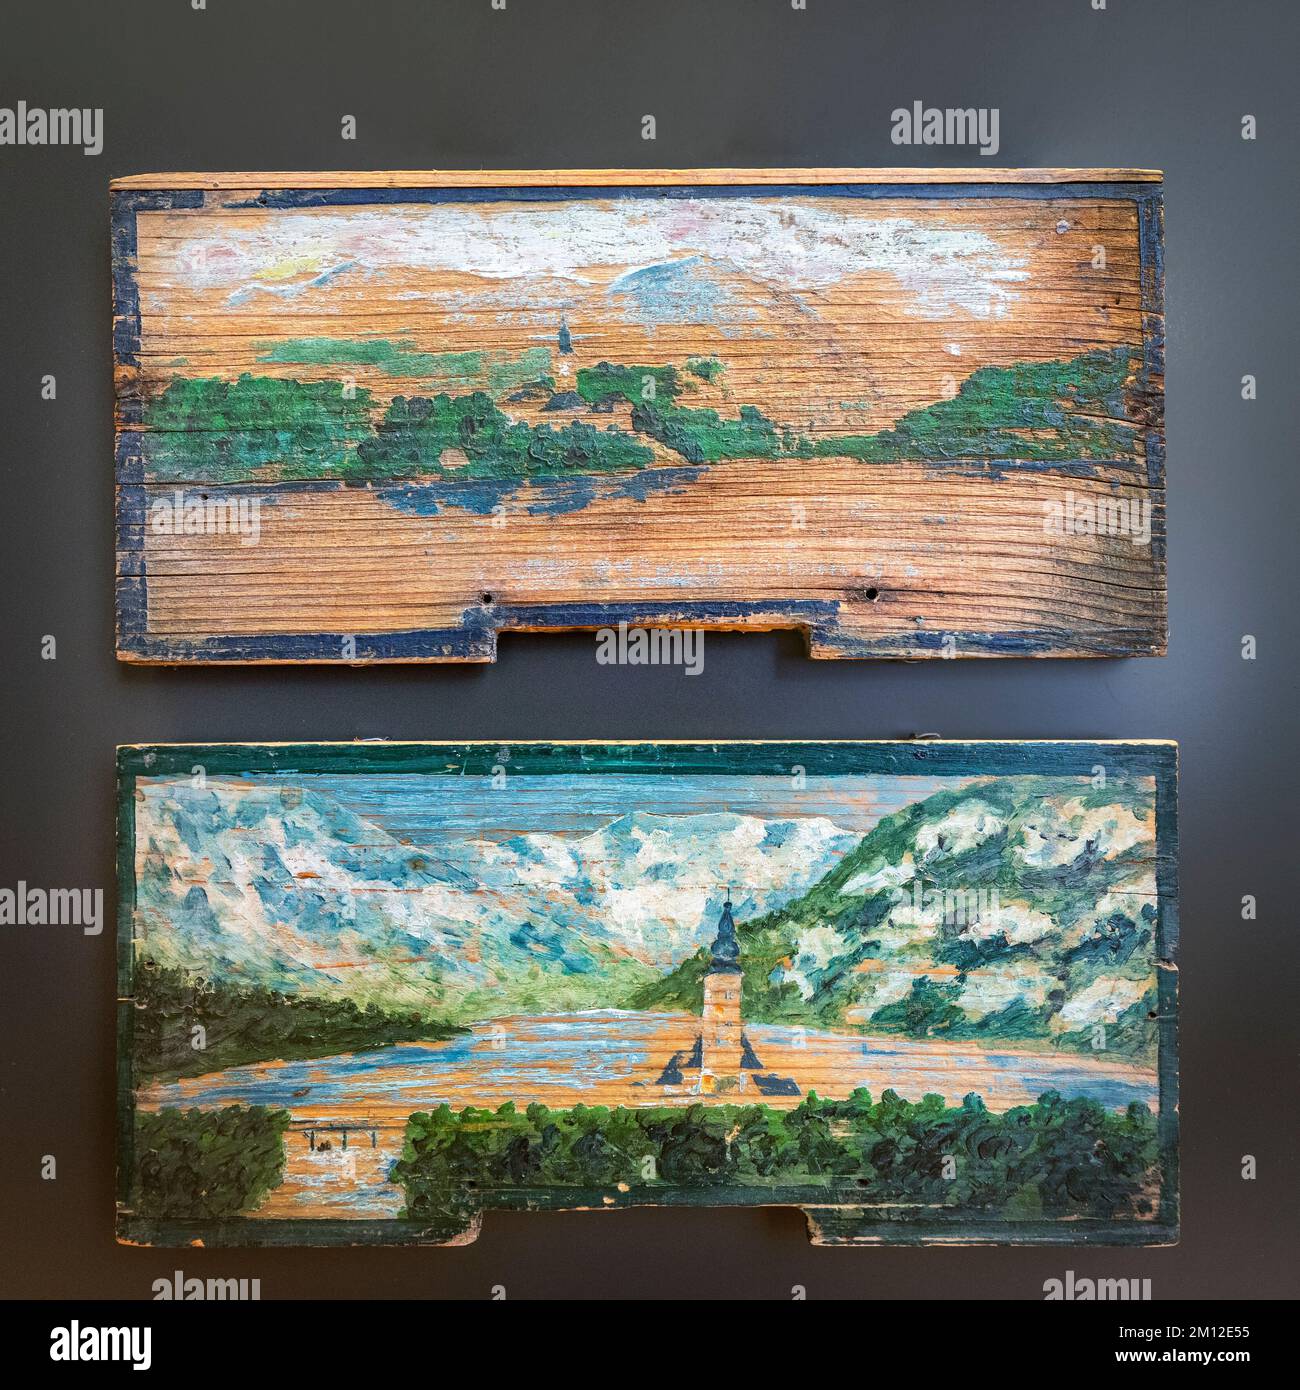 Slovenia, Upper Carniola, Radovljica, Museum of Apiculture, Painted beehive panels Stock Photo